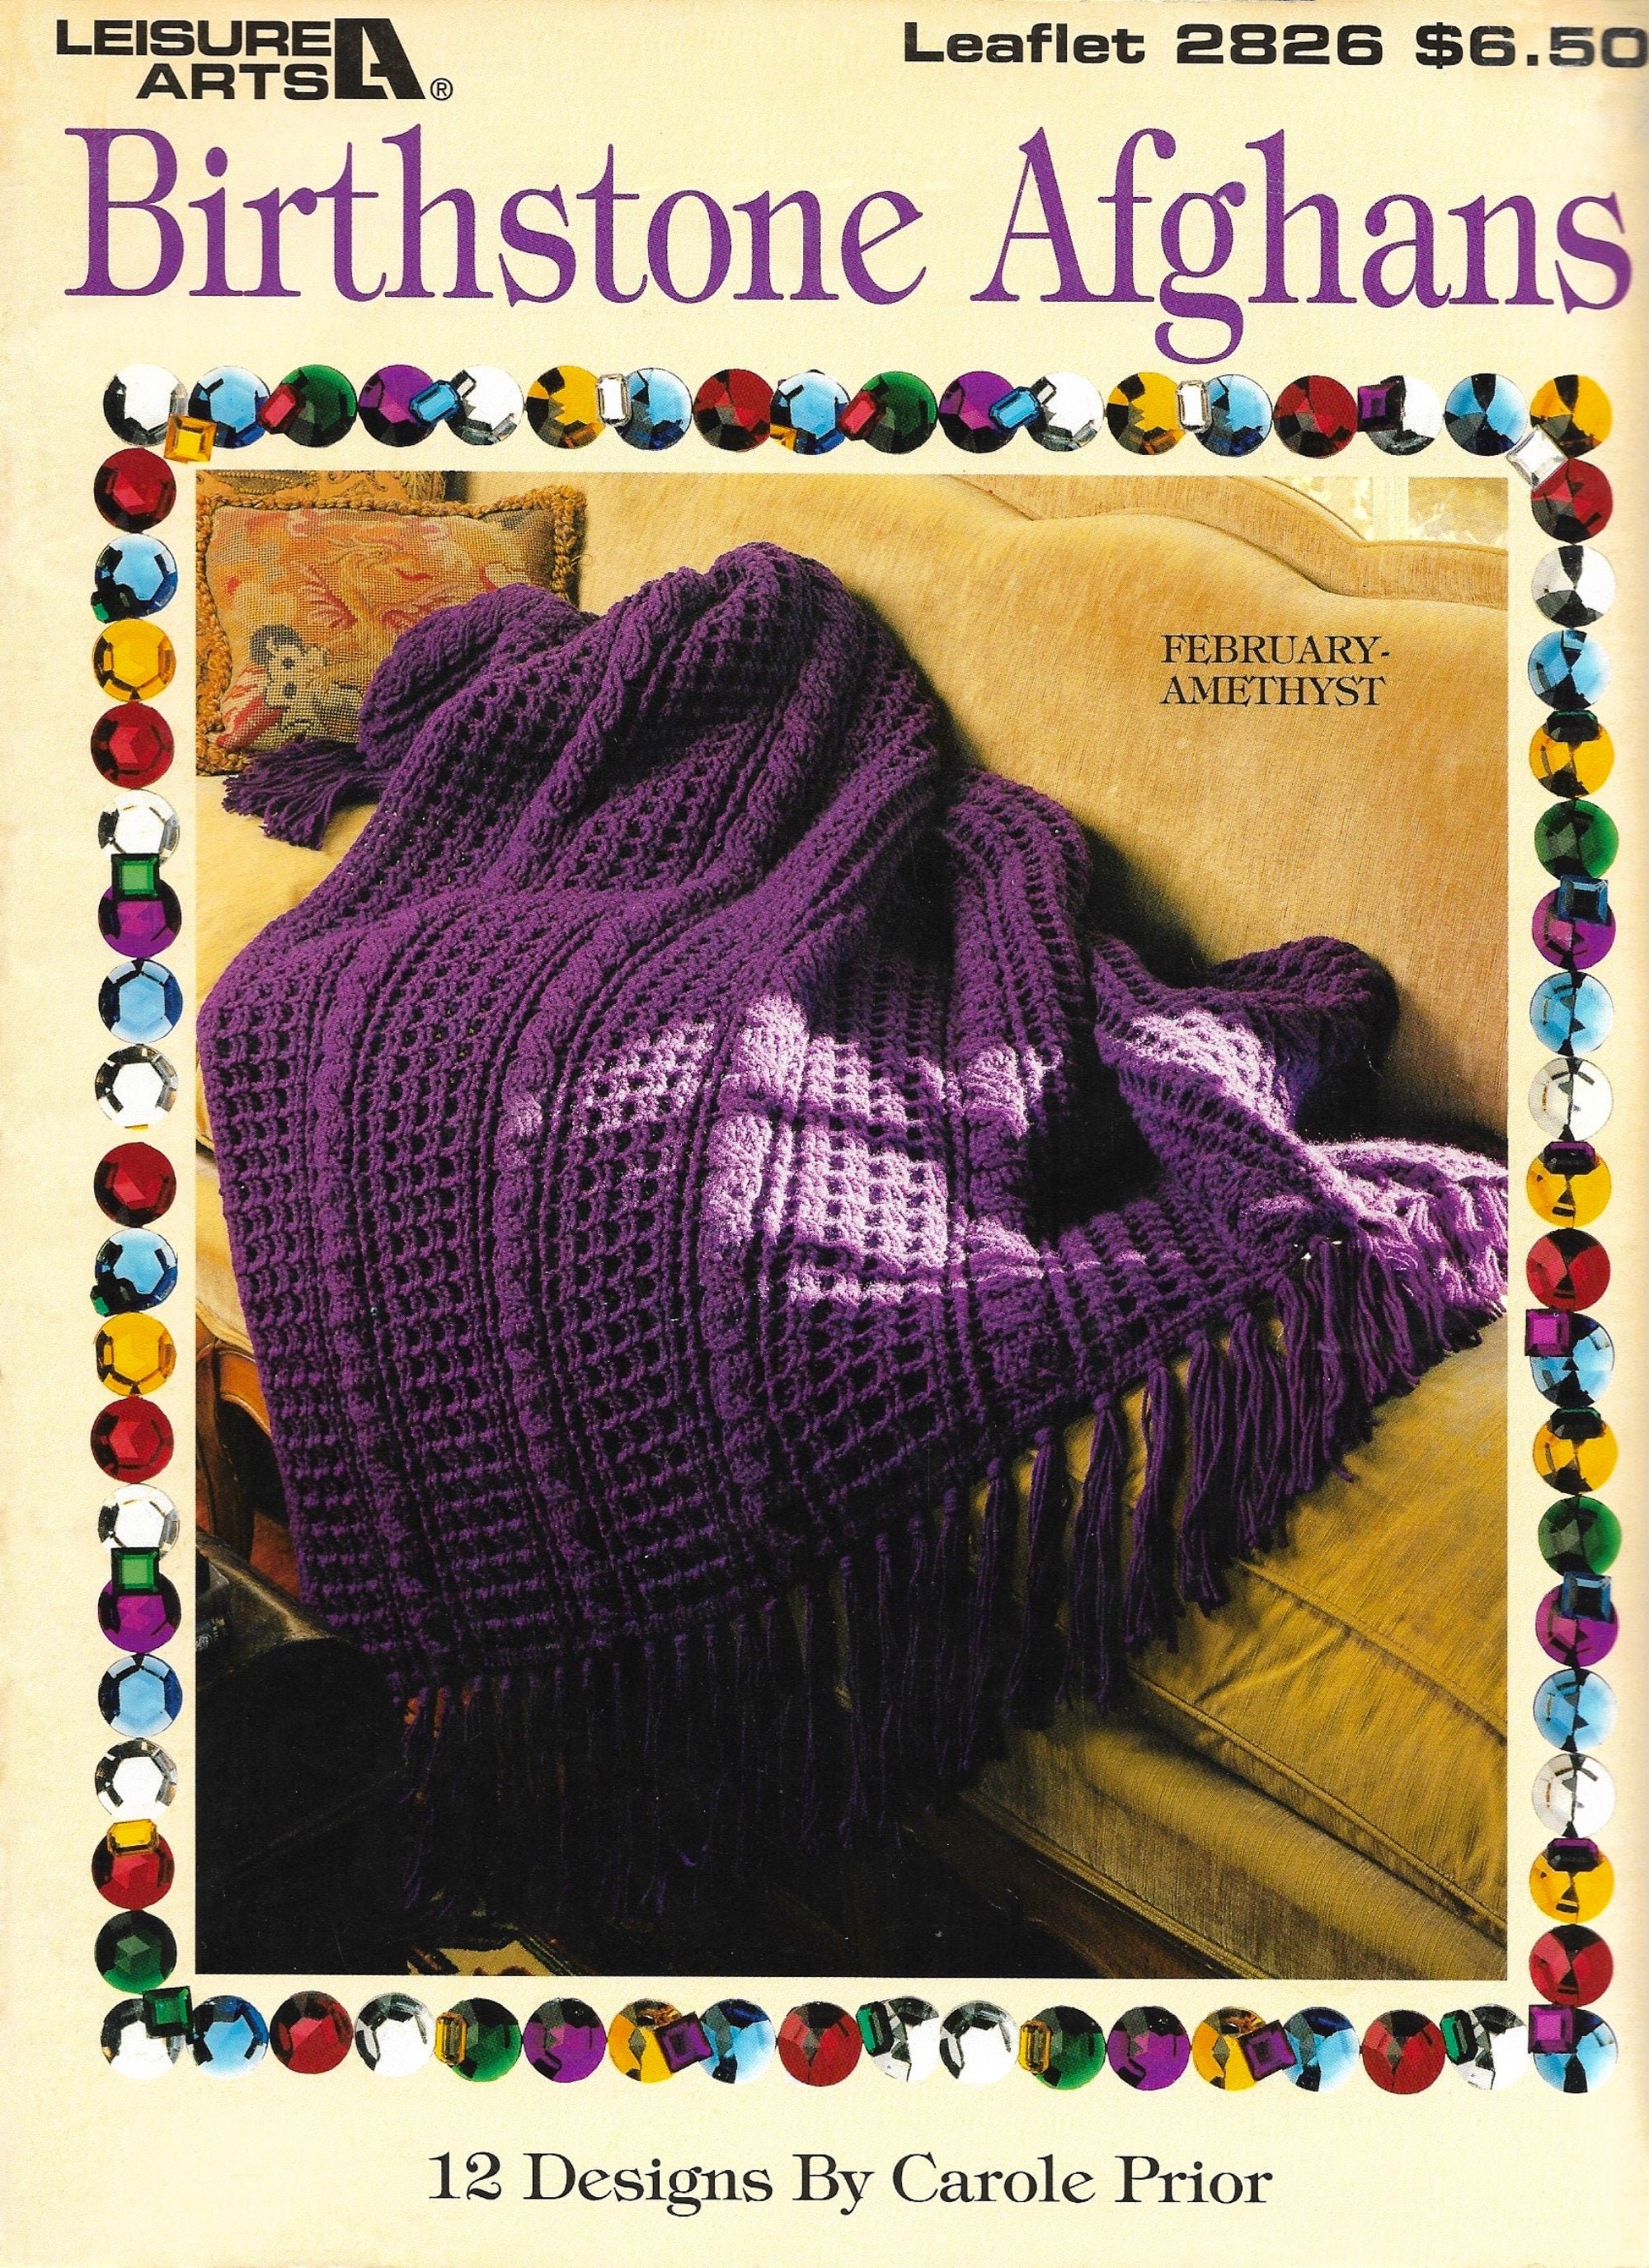 Ravelry: Leisure Arts Leaflet 44, Classic Afghans to Knit and